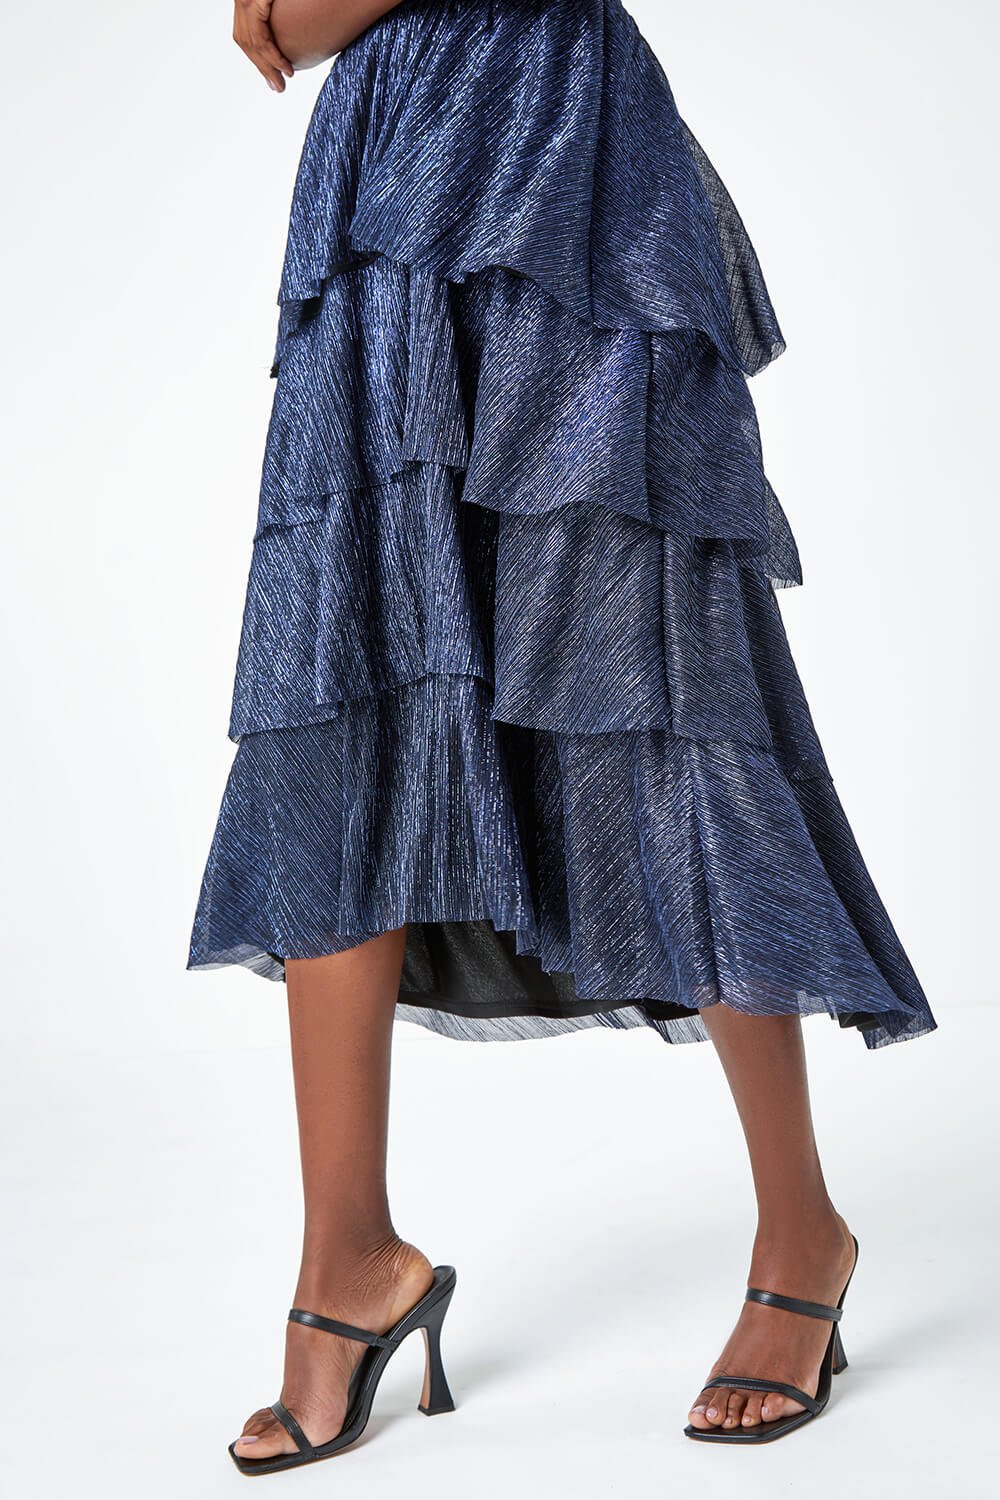 Midnight Blue Shimmer Tiered Midi Dress, Image 5 of 5